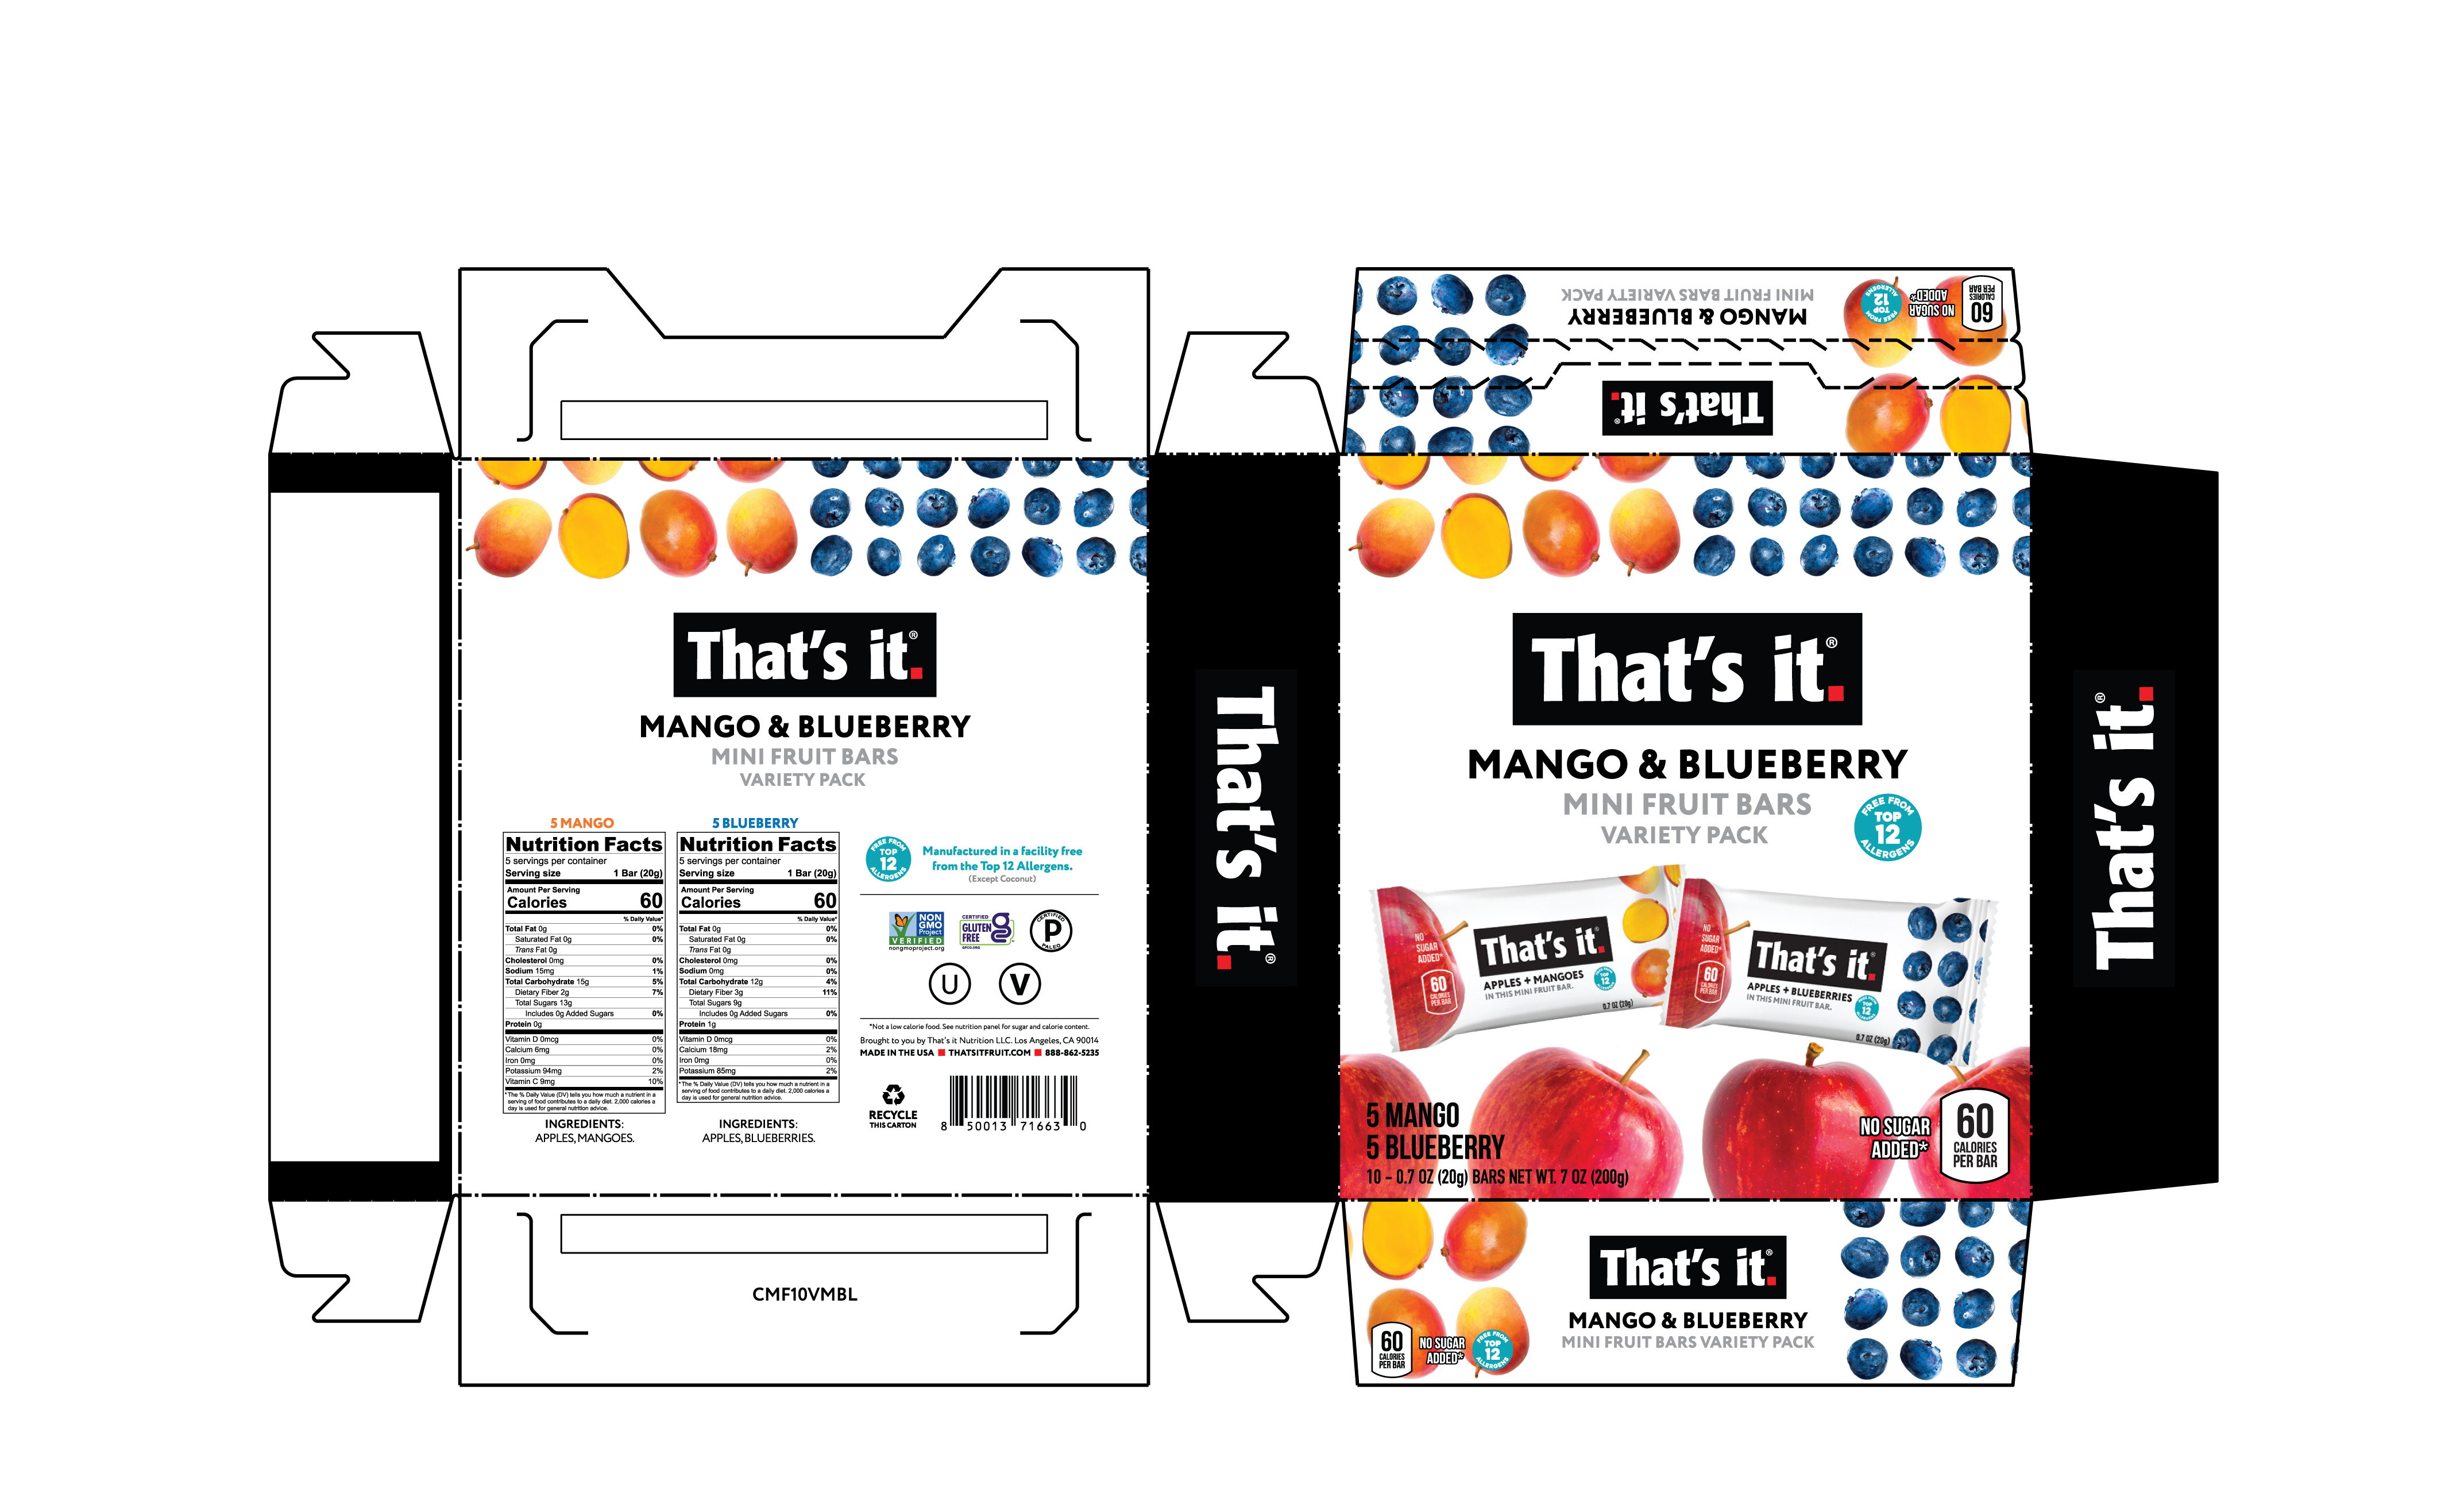 That's It Mango & Blueberry Mini Fruit Bars Variety Pack 6 innerpacks per case 7.0 oz Product Label